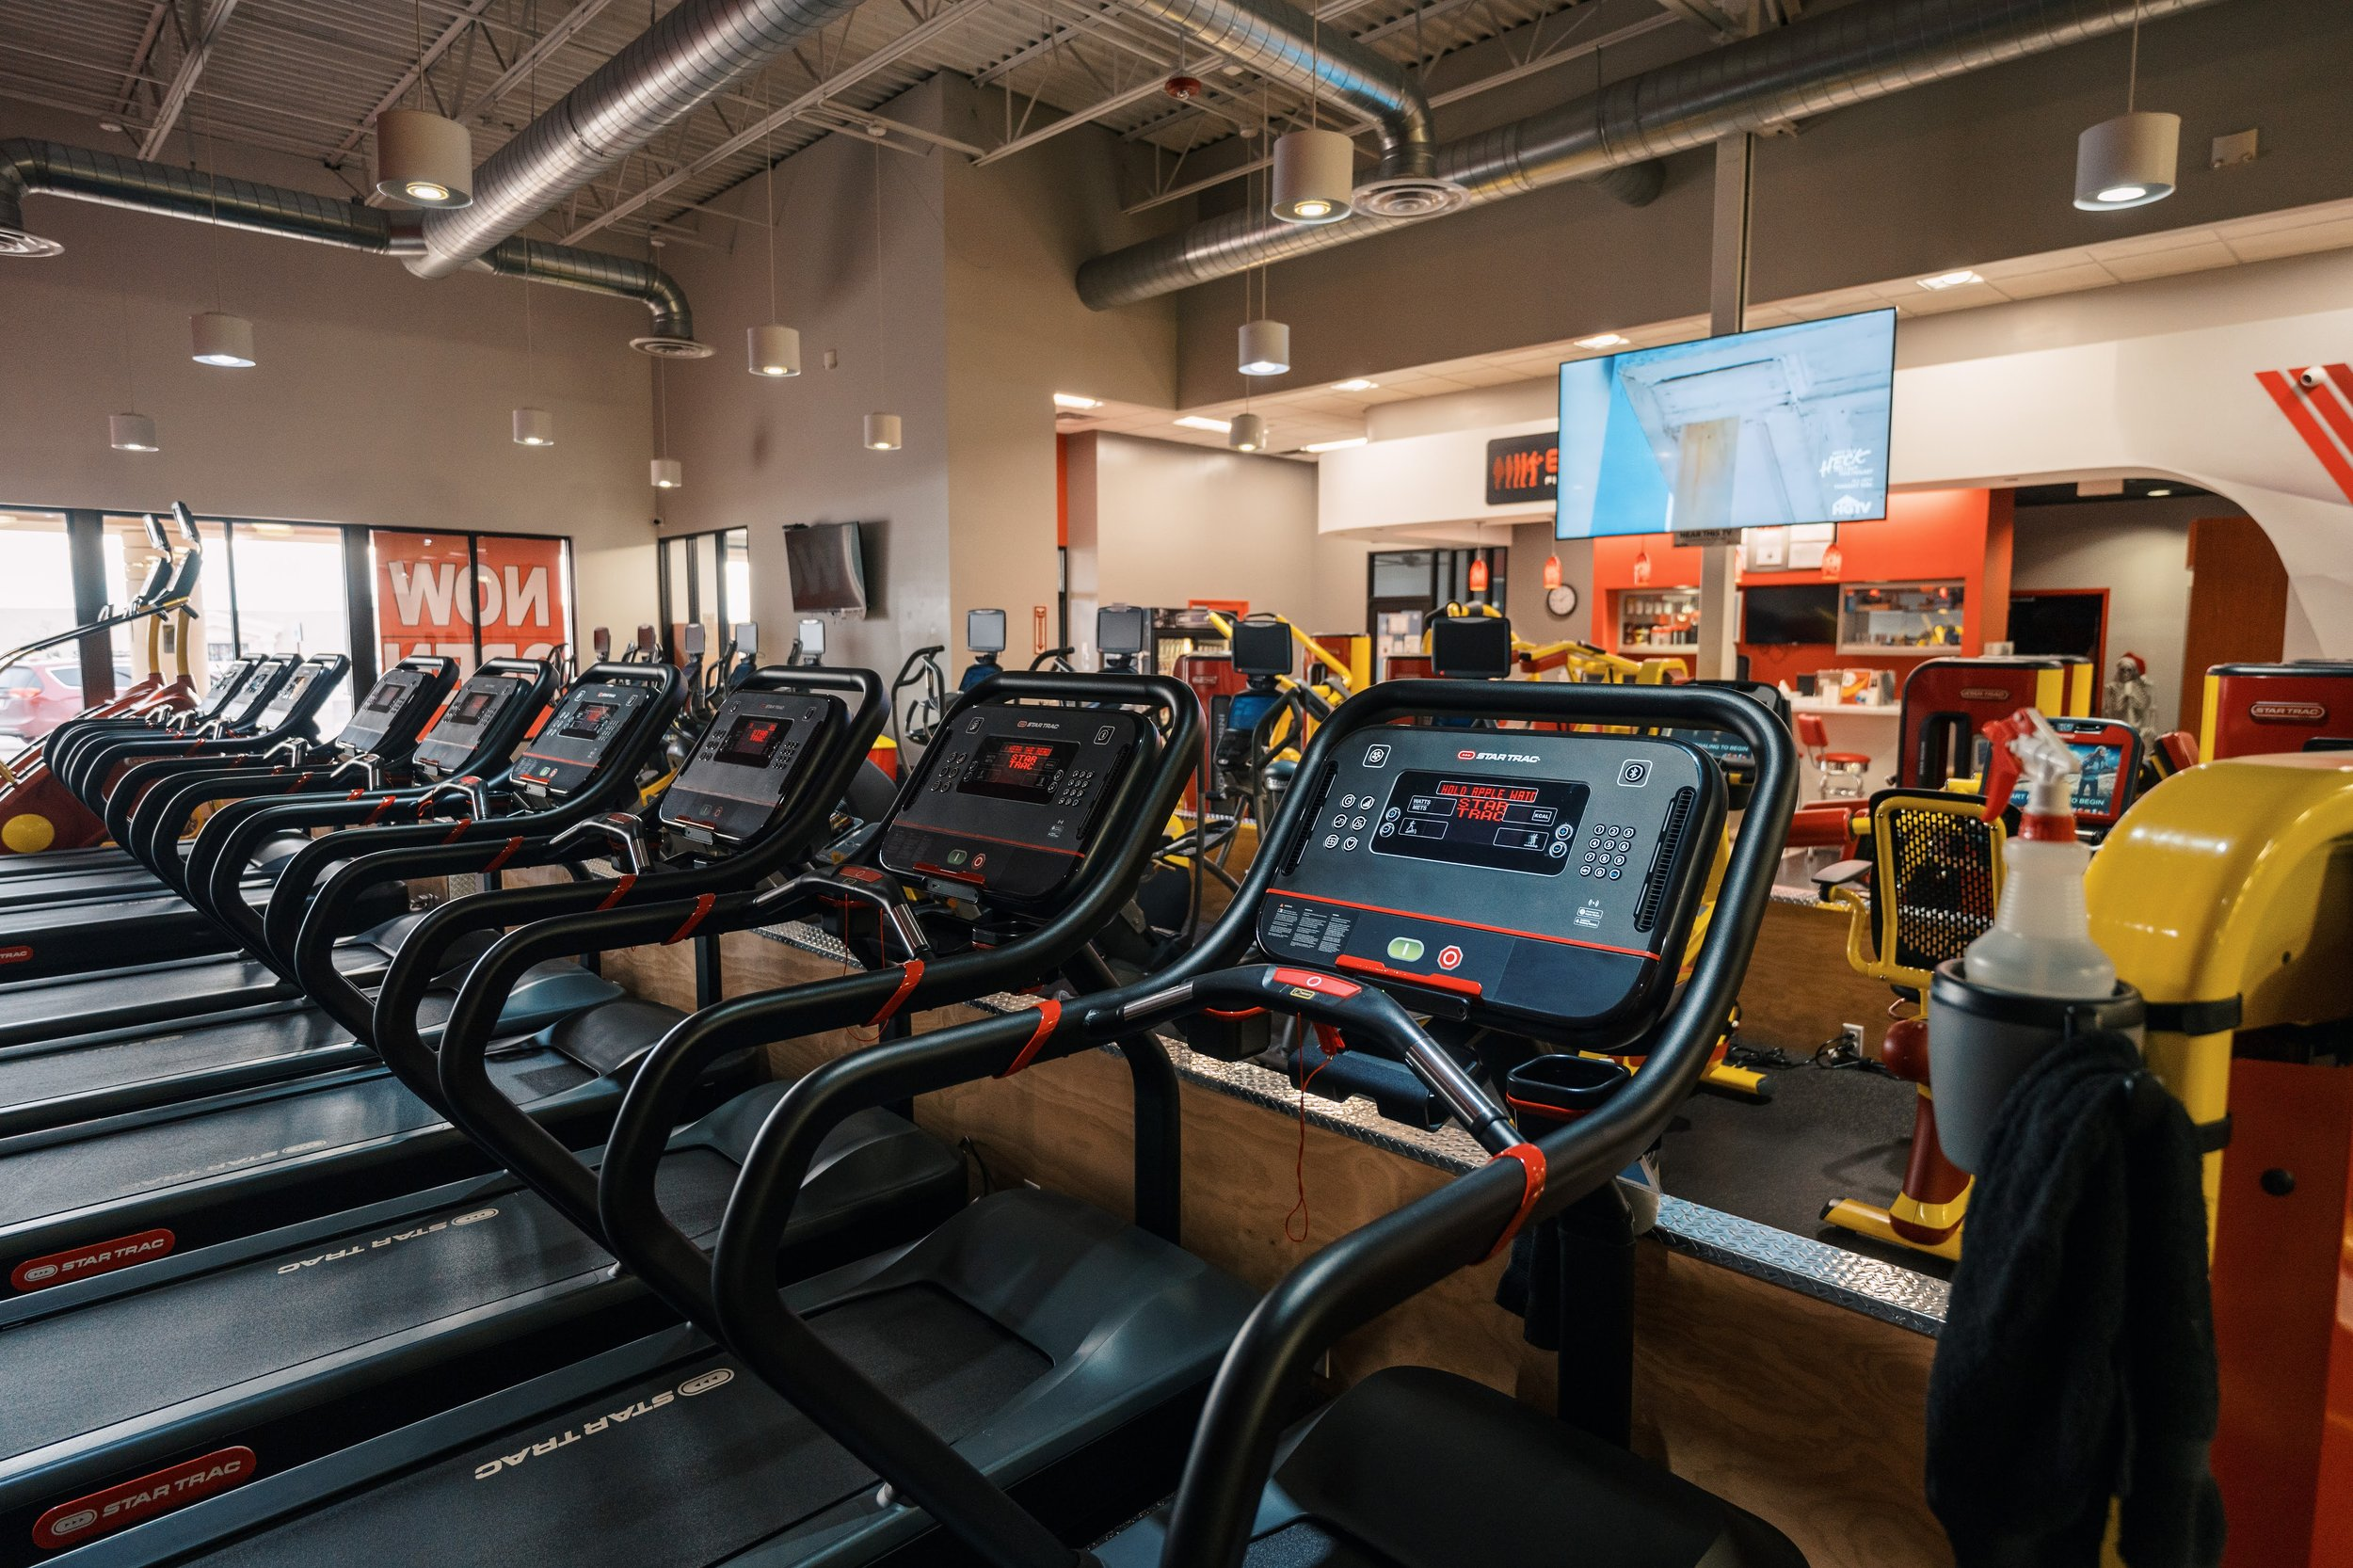 A gym for physical for physical exercise, cardiovascular health, sports and related activities, and exercise programming